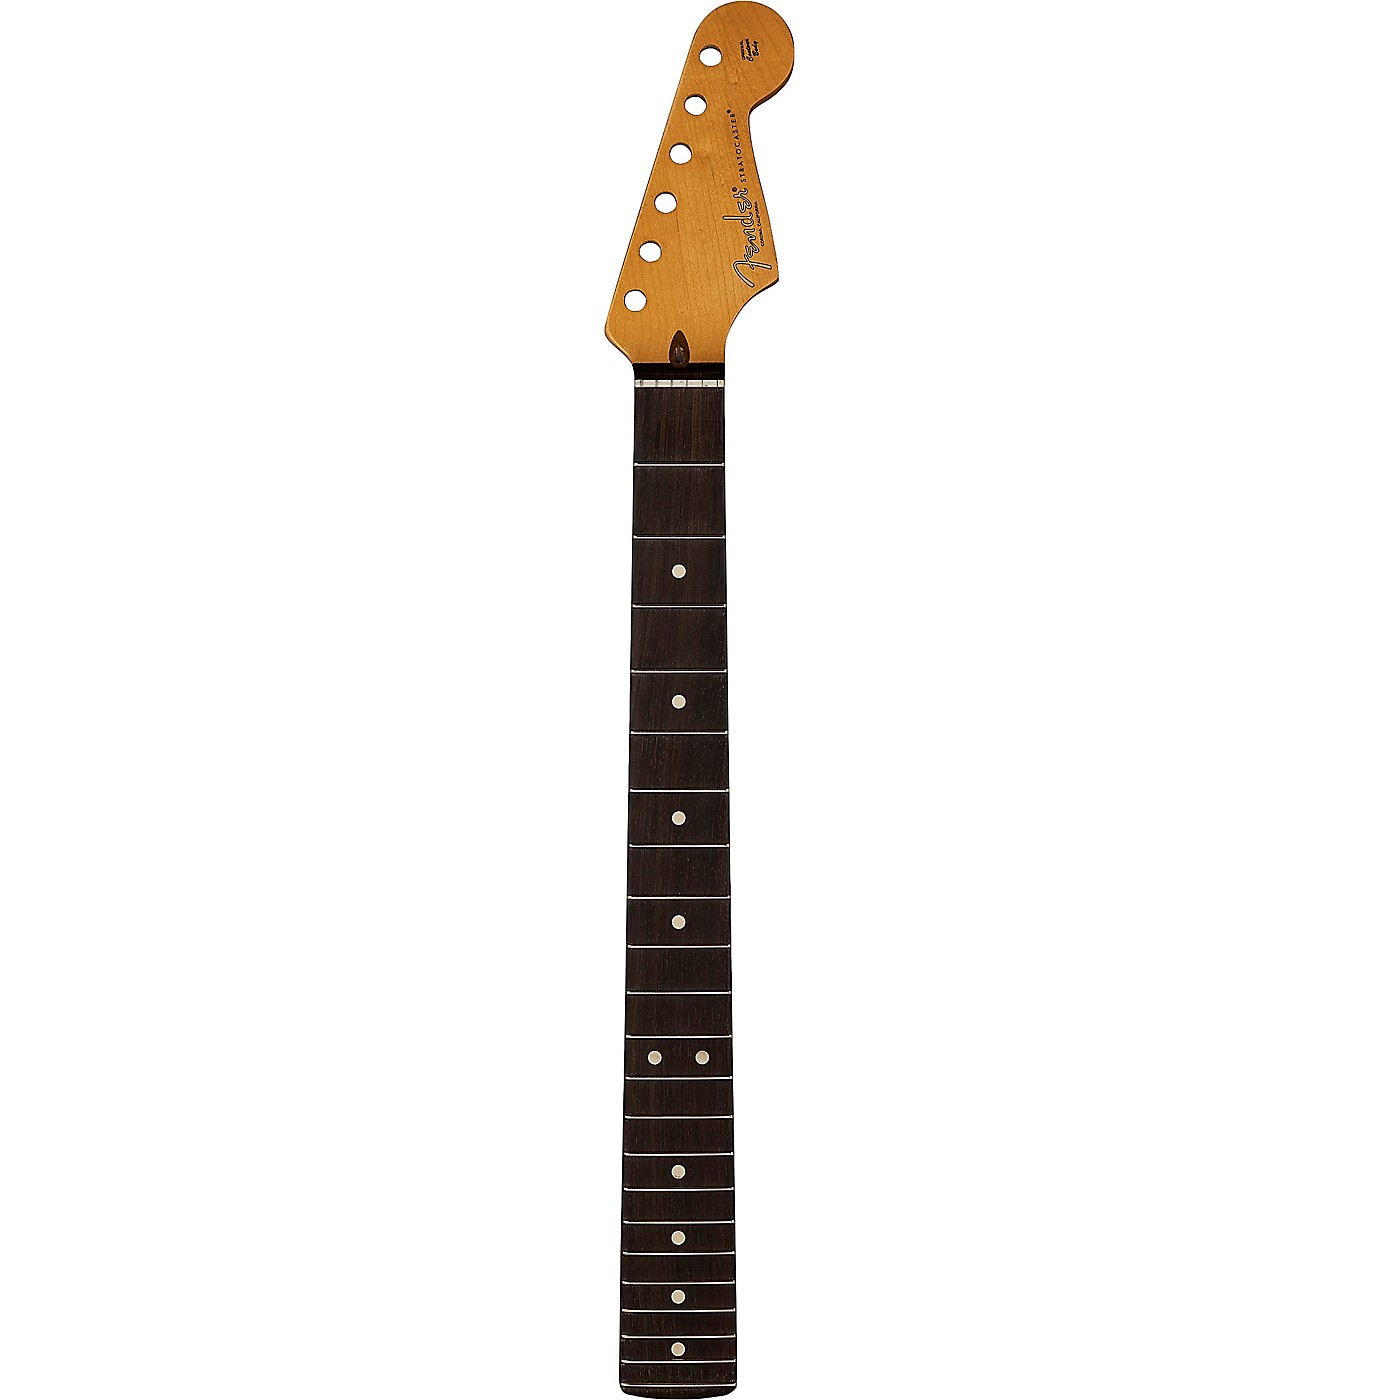 Fender American Professional II Stratocaster Neck, 22 Narrow-Tall Frets, 9.5